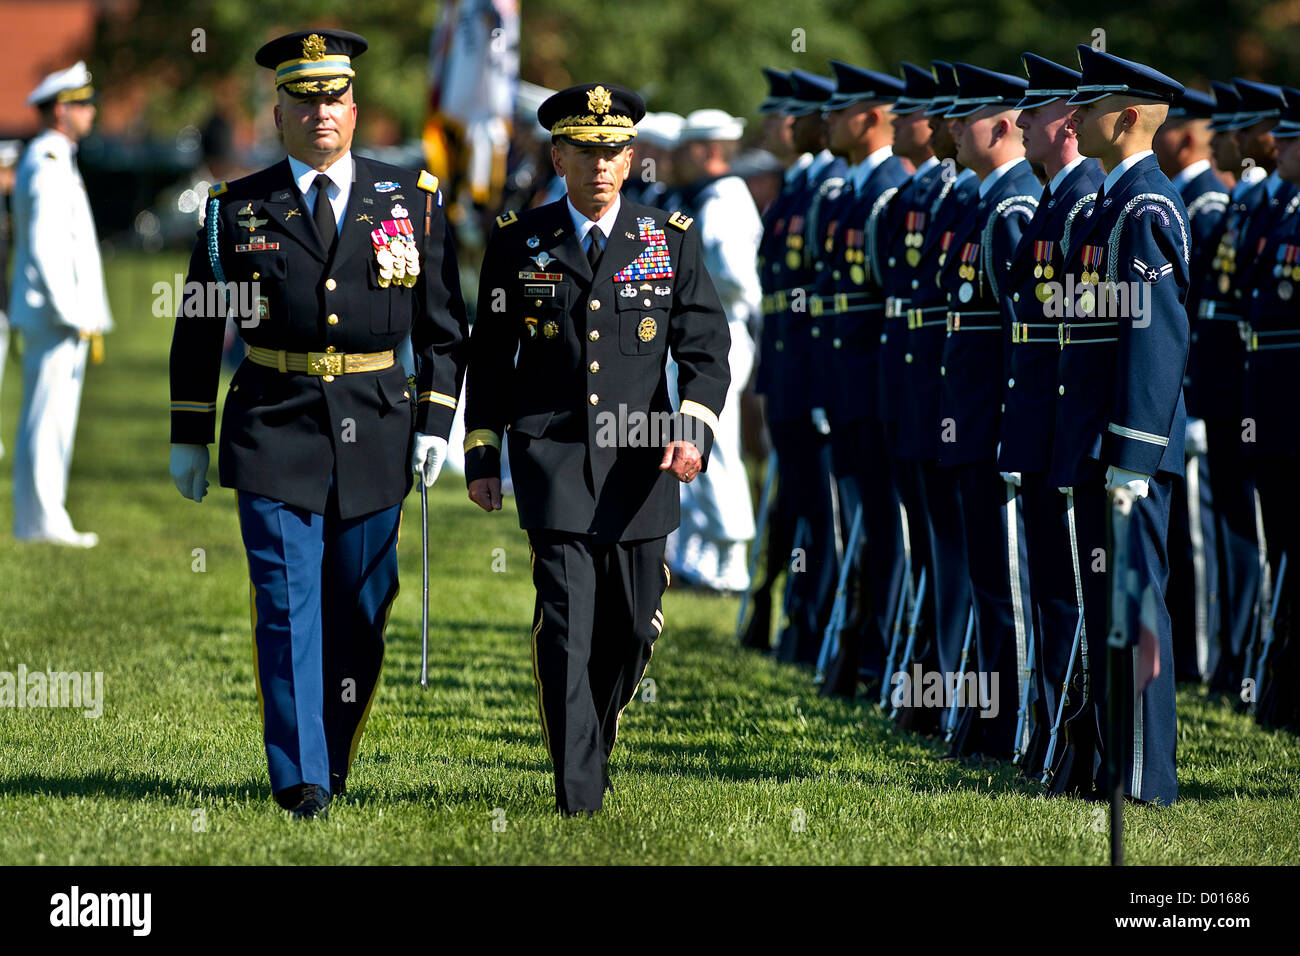 U.S. Army General David H. Petraeus reviews troops at his retirement ceremony and Armed Forces Farewell, Stock Photo